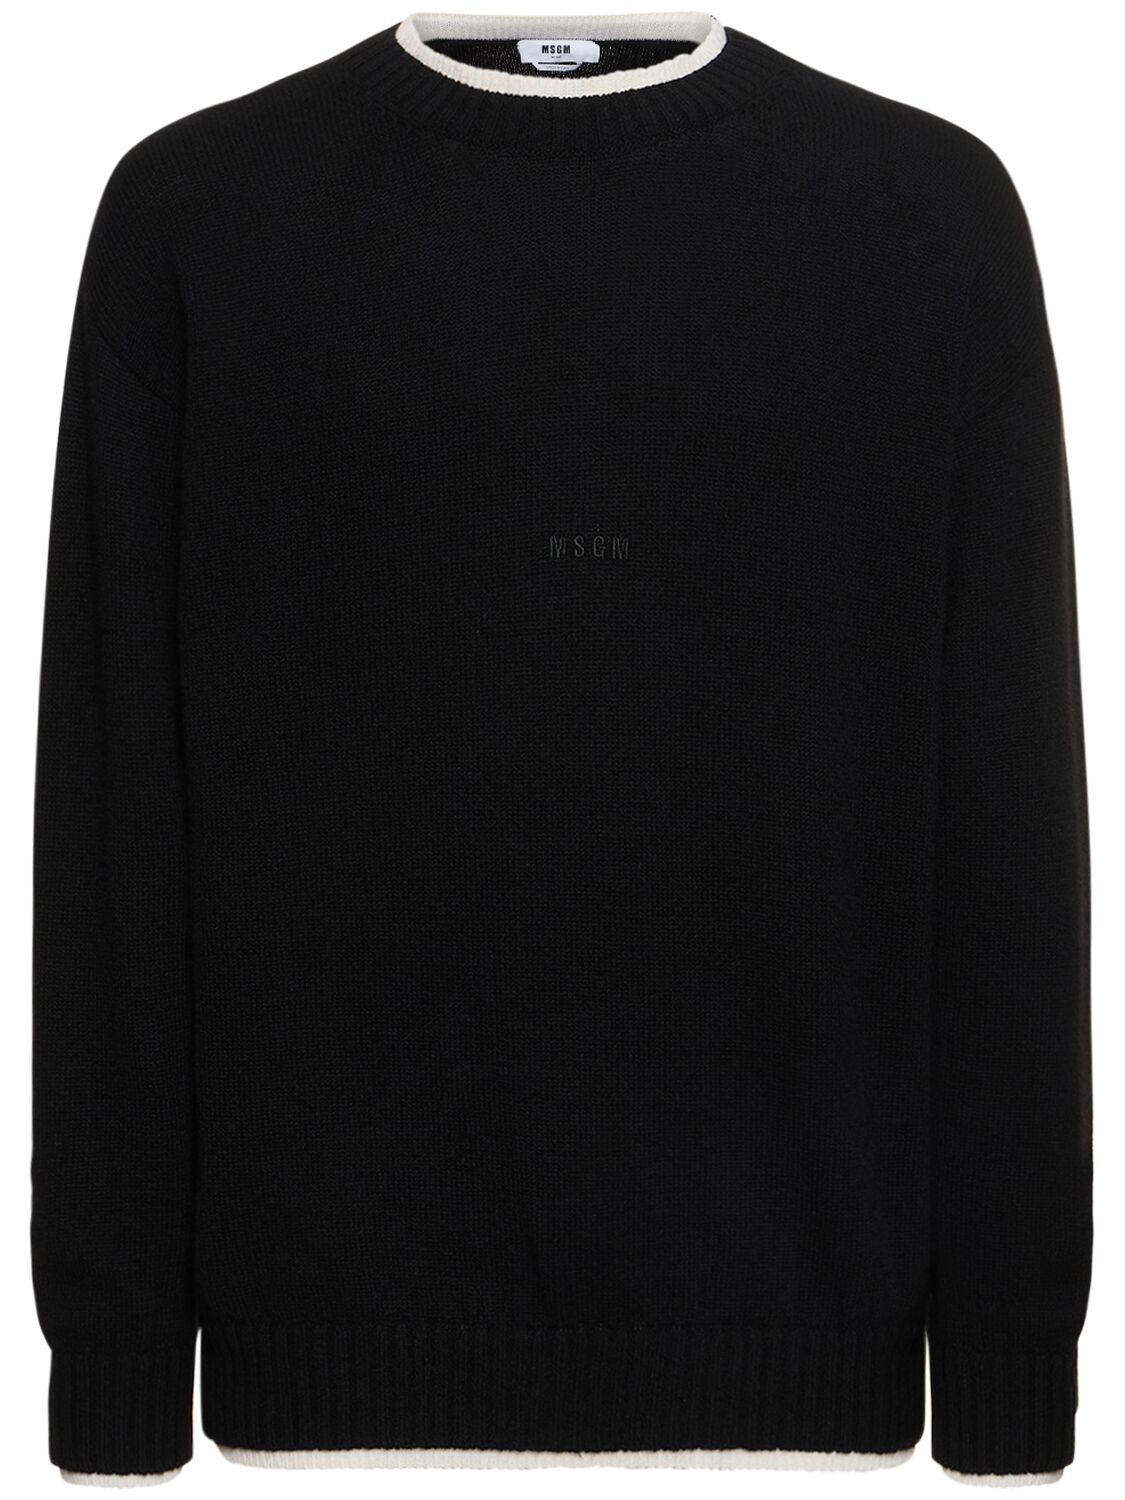 Msgm Logo Wool & Cashmere Knit Sweater In Black